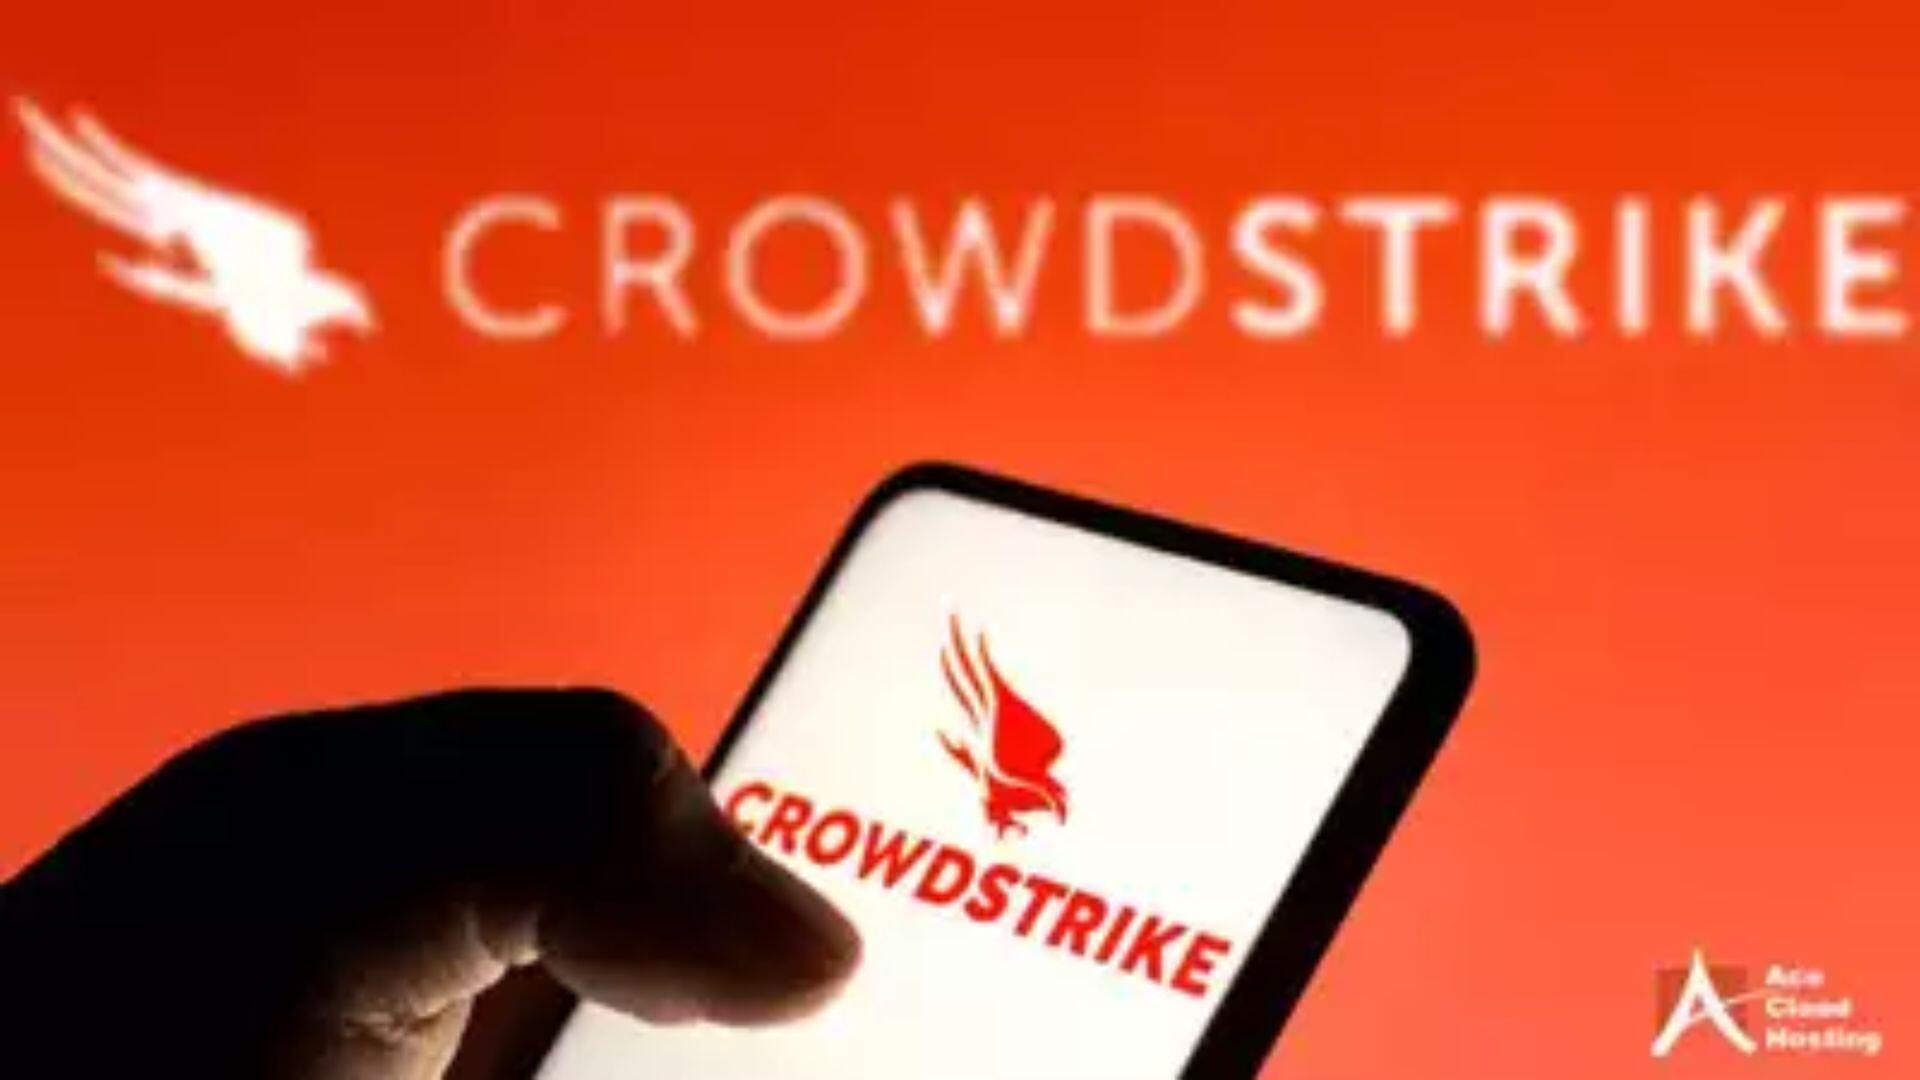 Crowdstrike Offers $10 Gift Card As An Apology For Causing Inconvenience